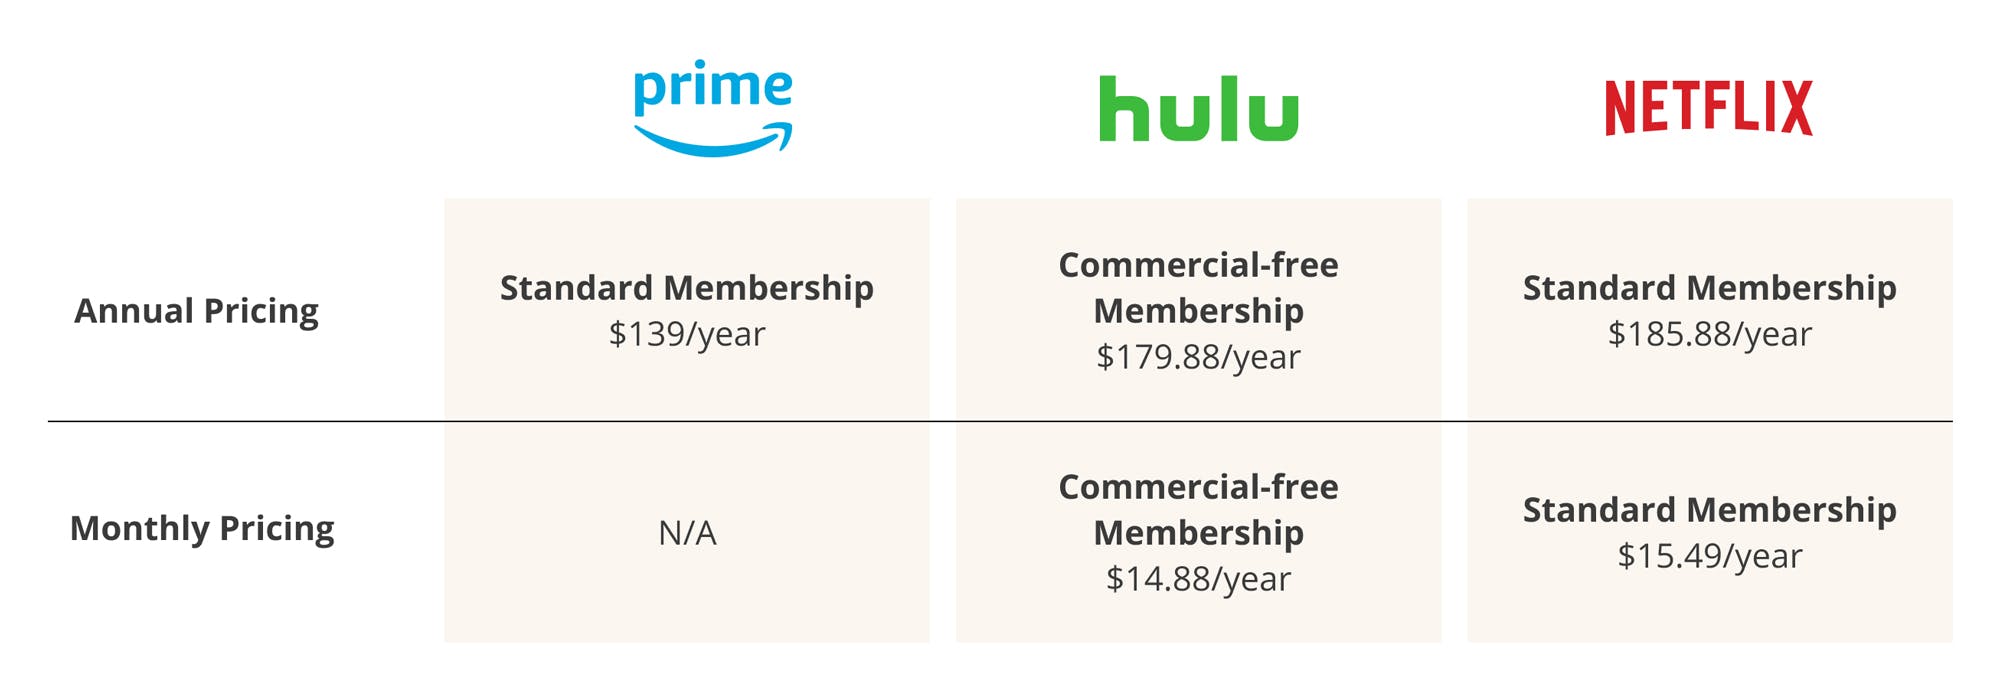 graphic showing cost comparison between amazon prime video, hulu, and netflix streaming services